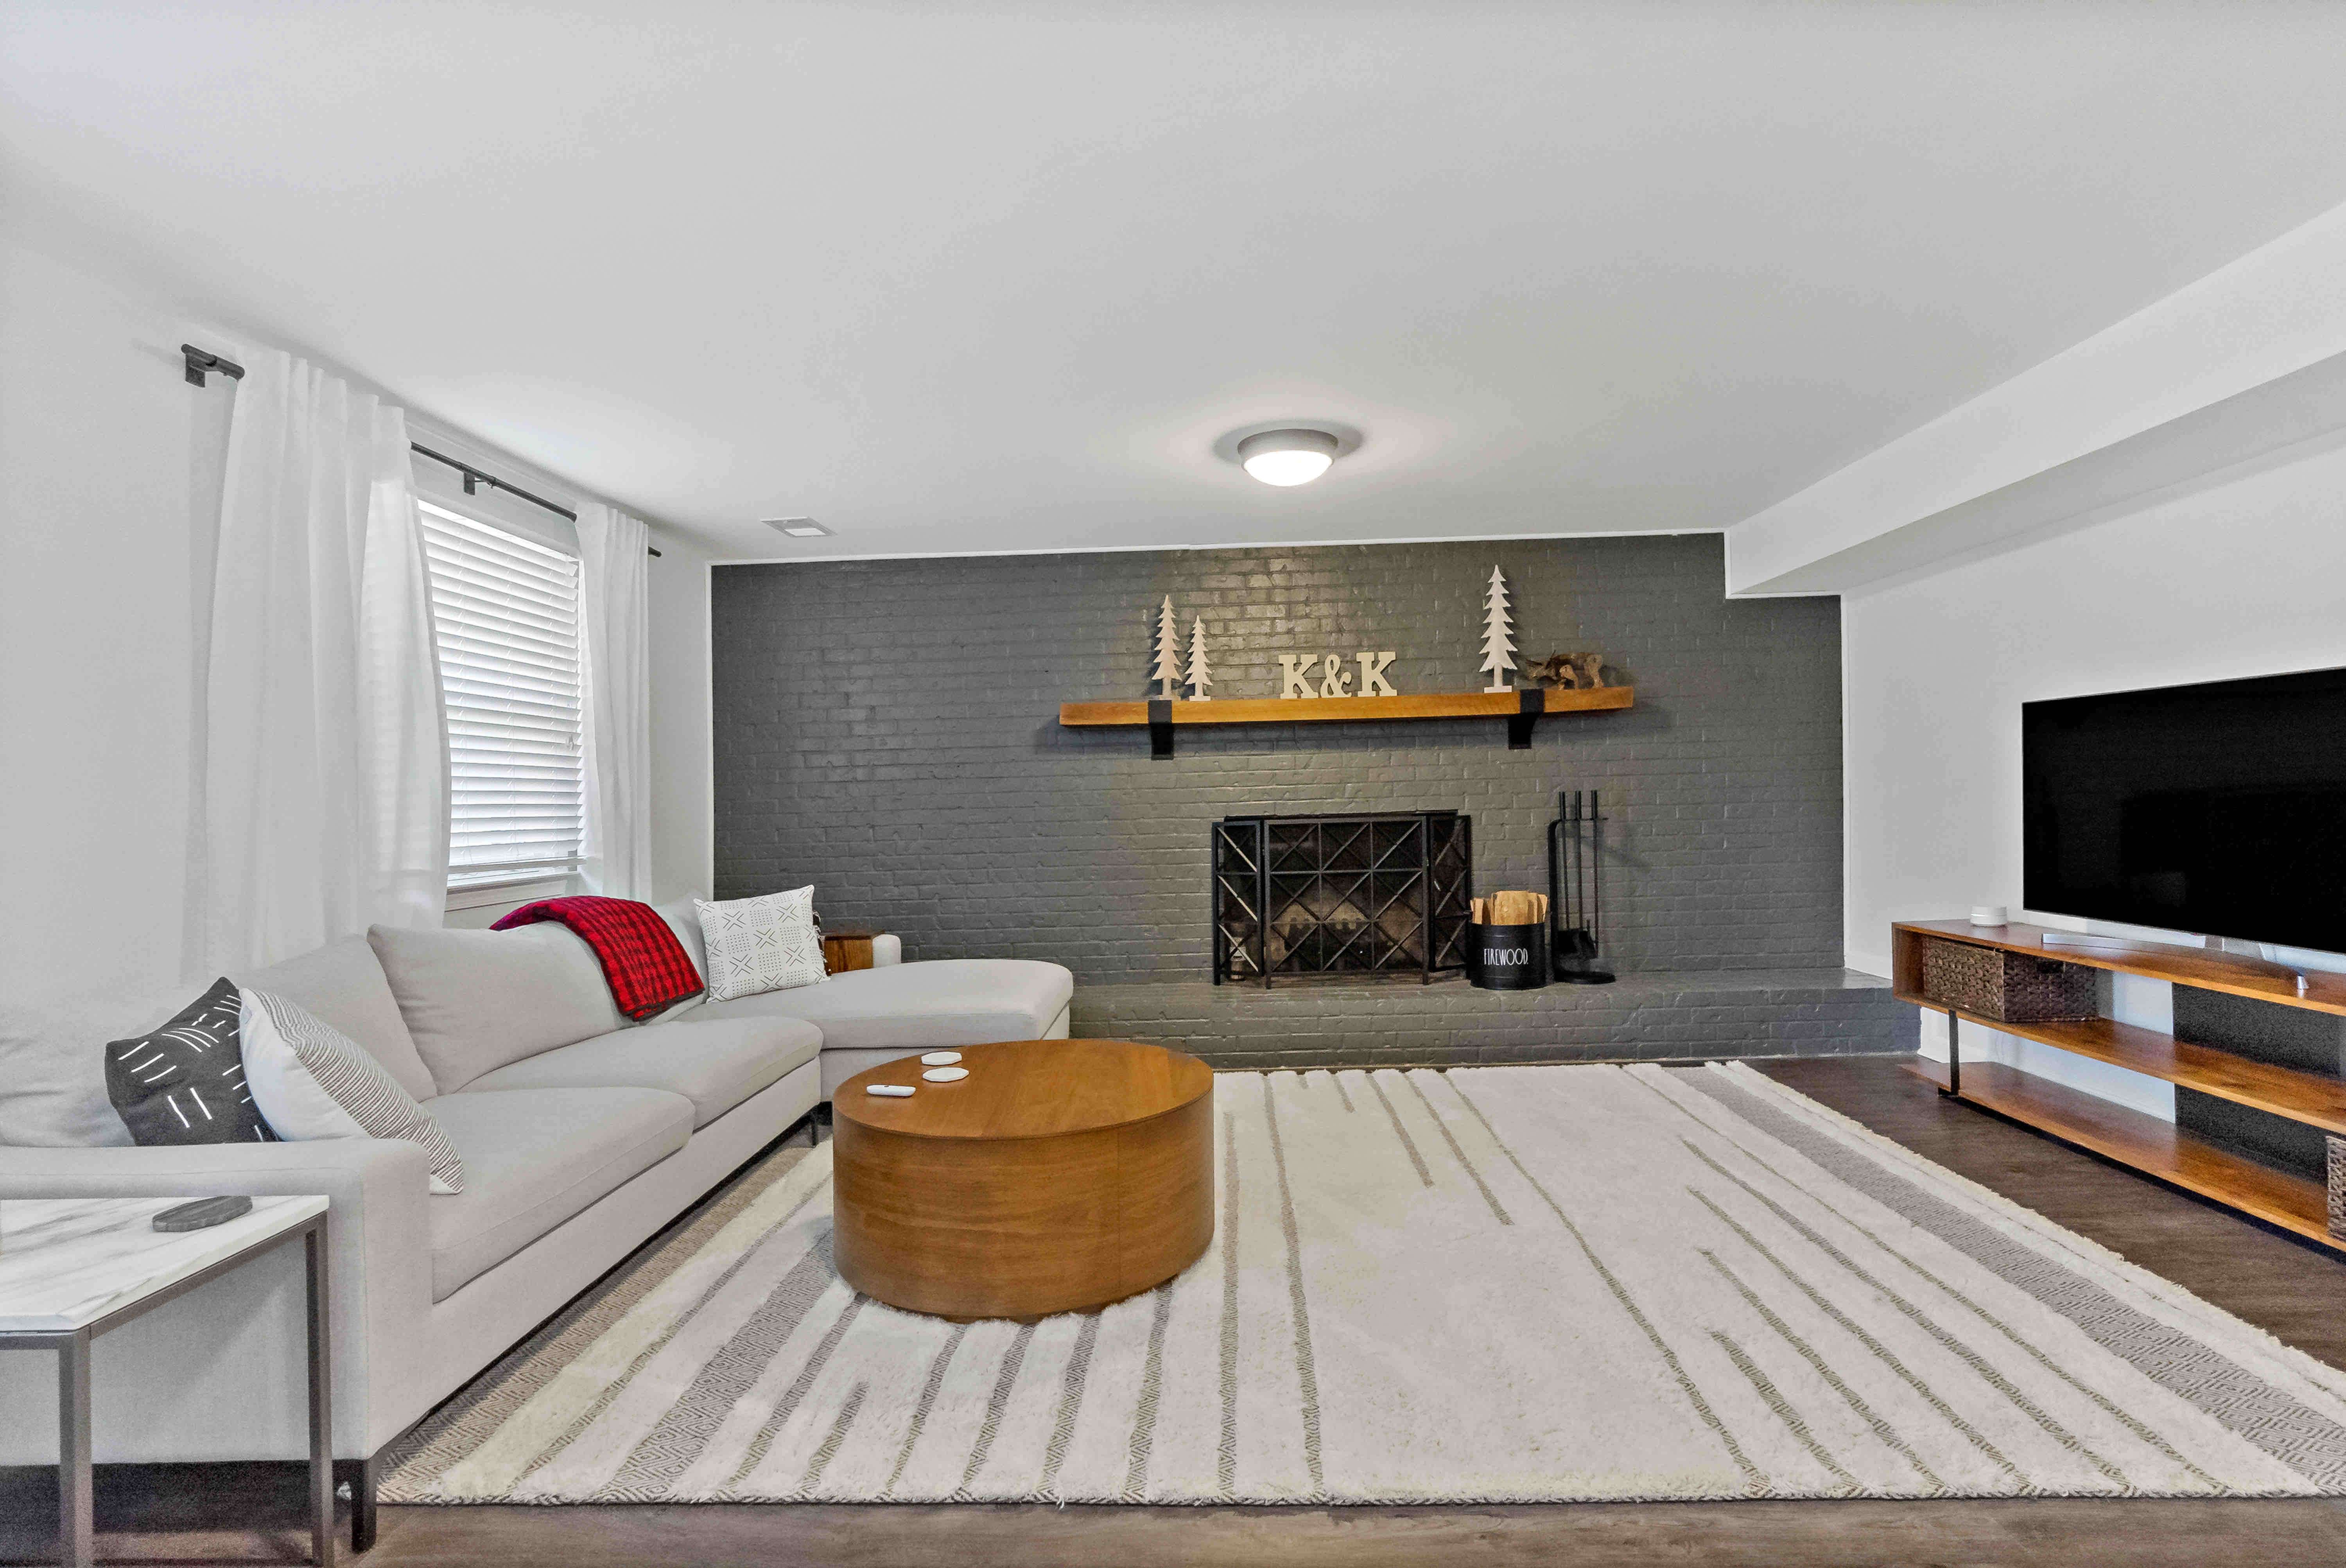 Living room with fireplace and area rug